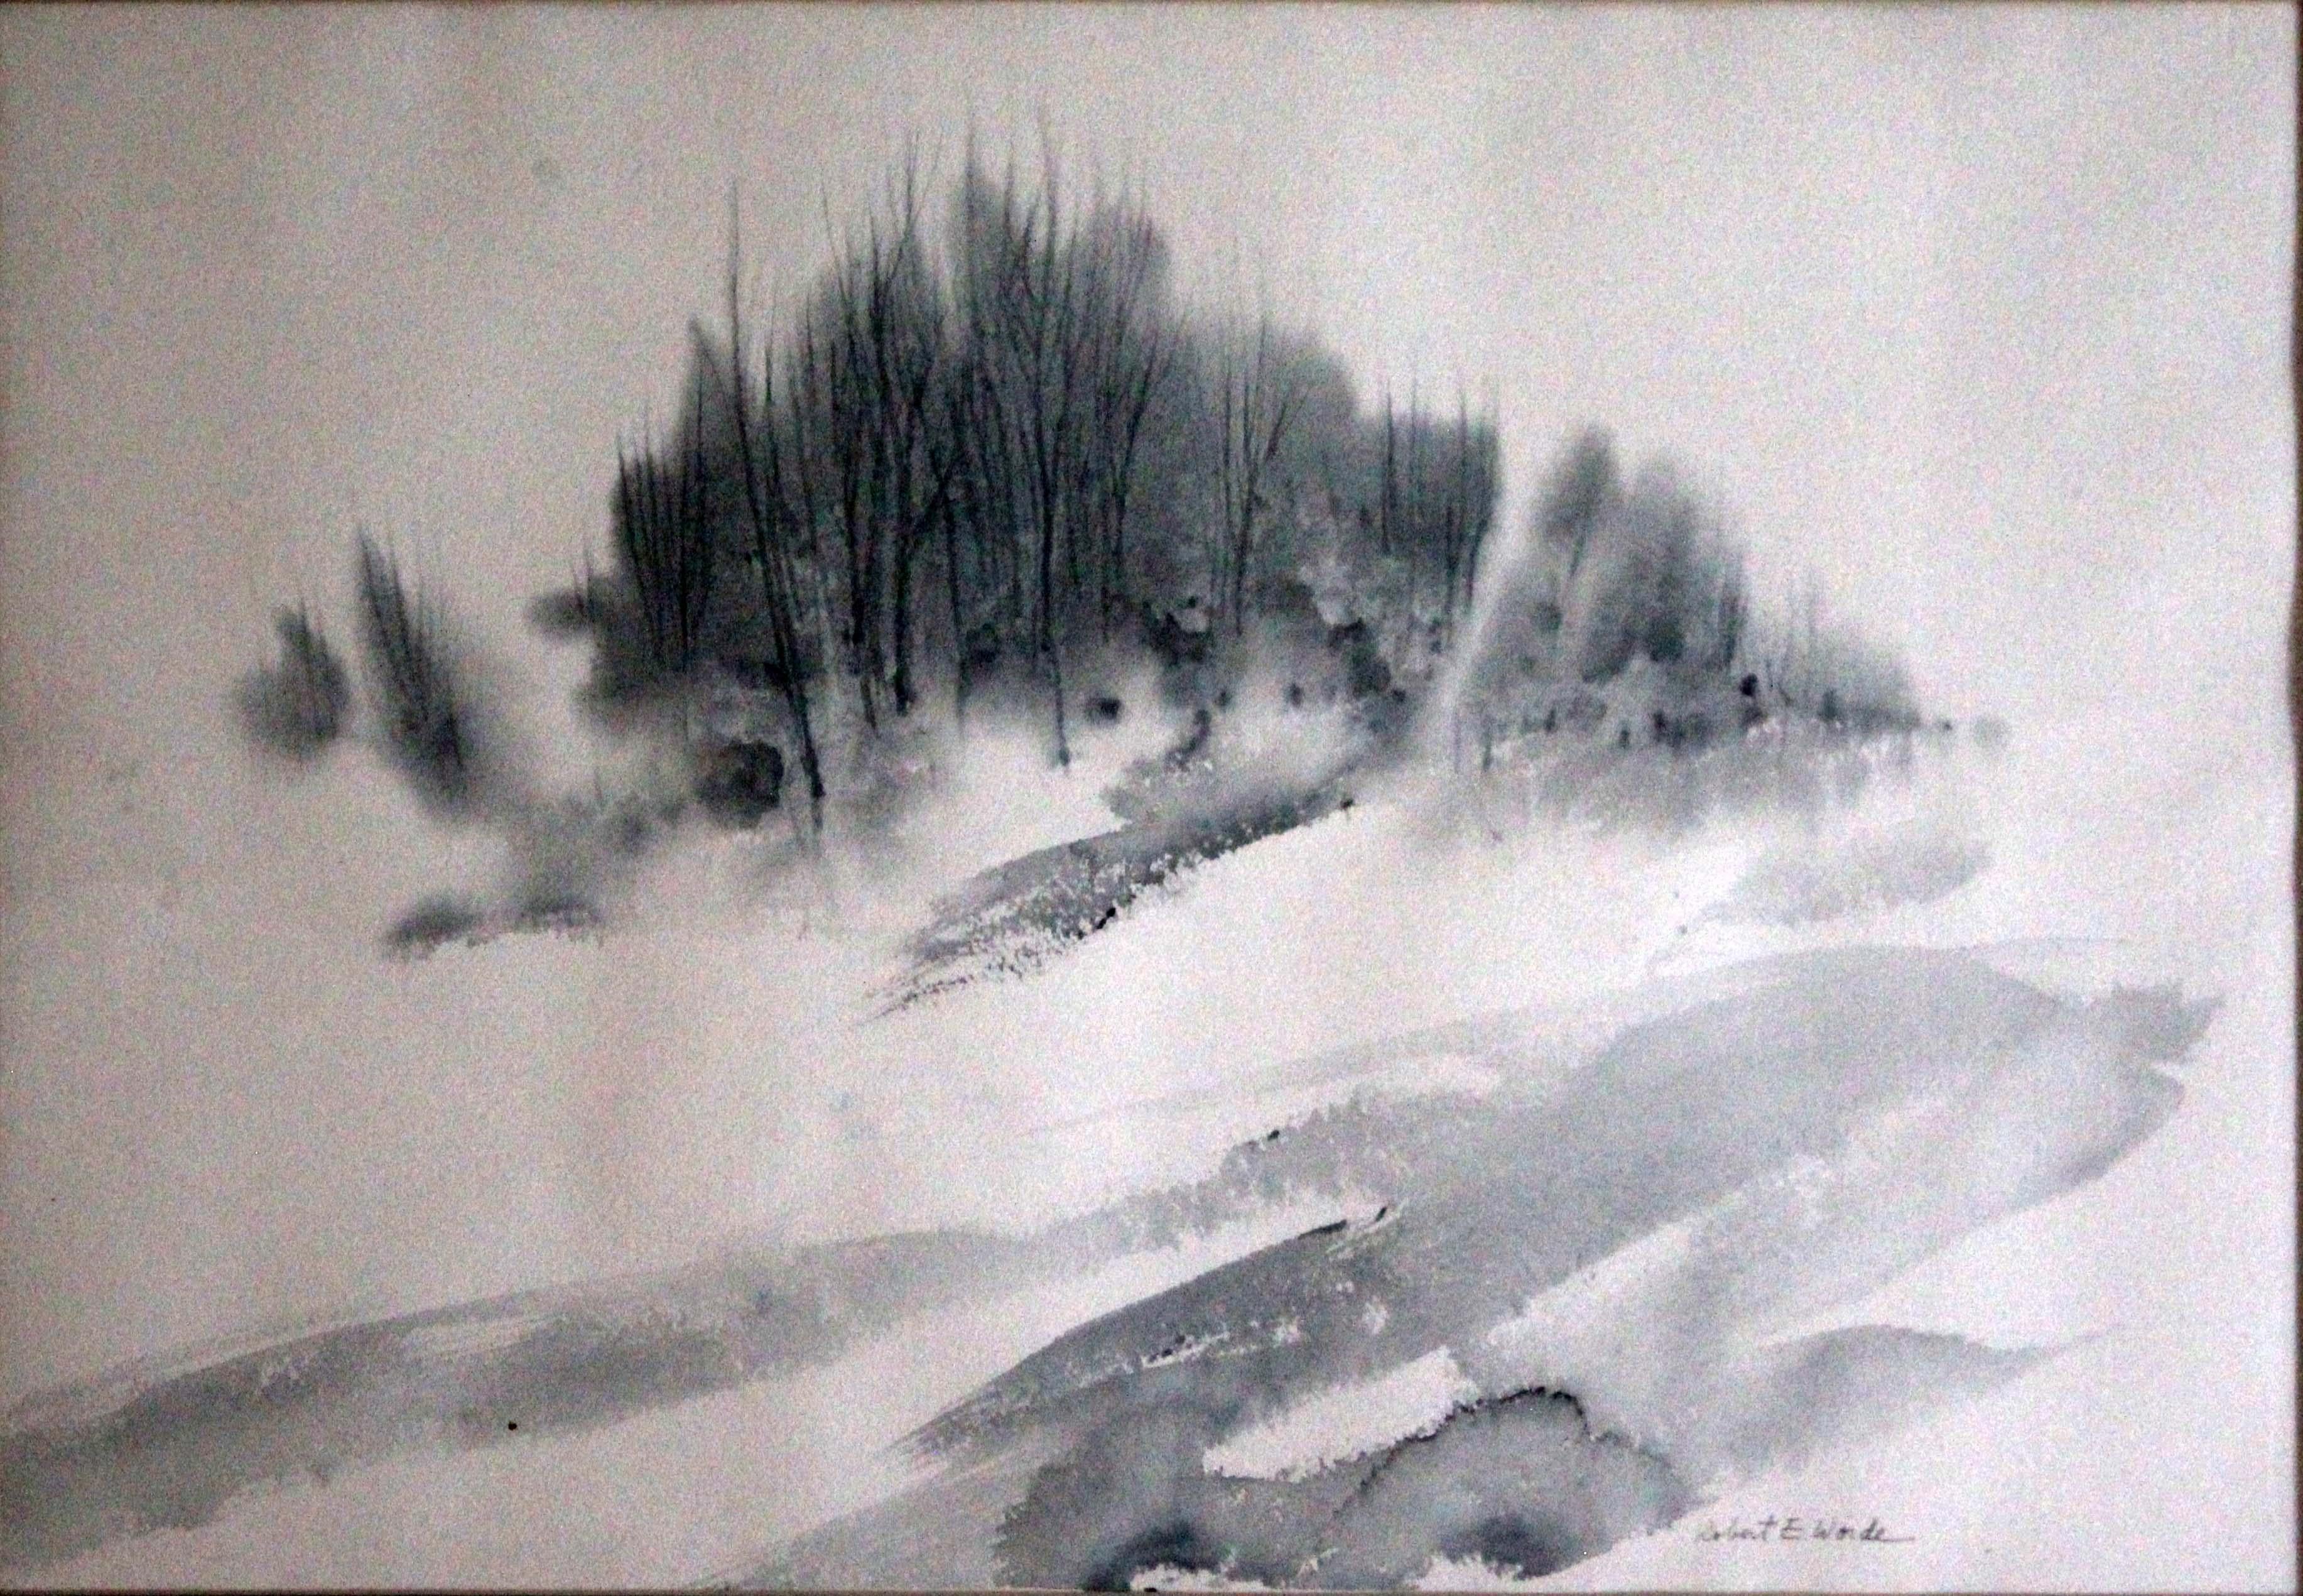 A somber and contemplative original watercolor depicting a landscape in grey scale by American artist Robert E Woide. Proceeds from this sale will be donated to The Sight Center of Northwest Ohio and Southeast Michigan, which helps people of all